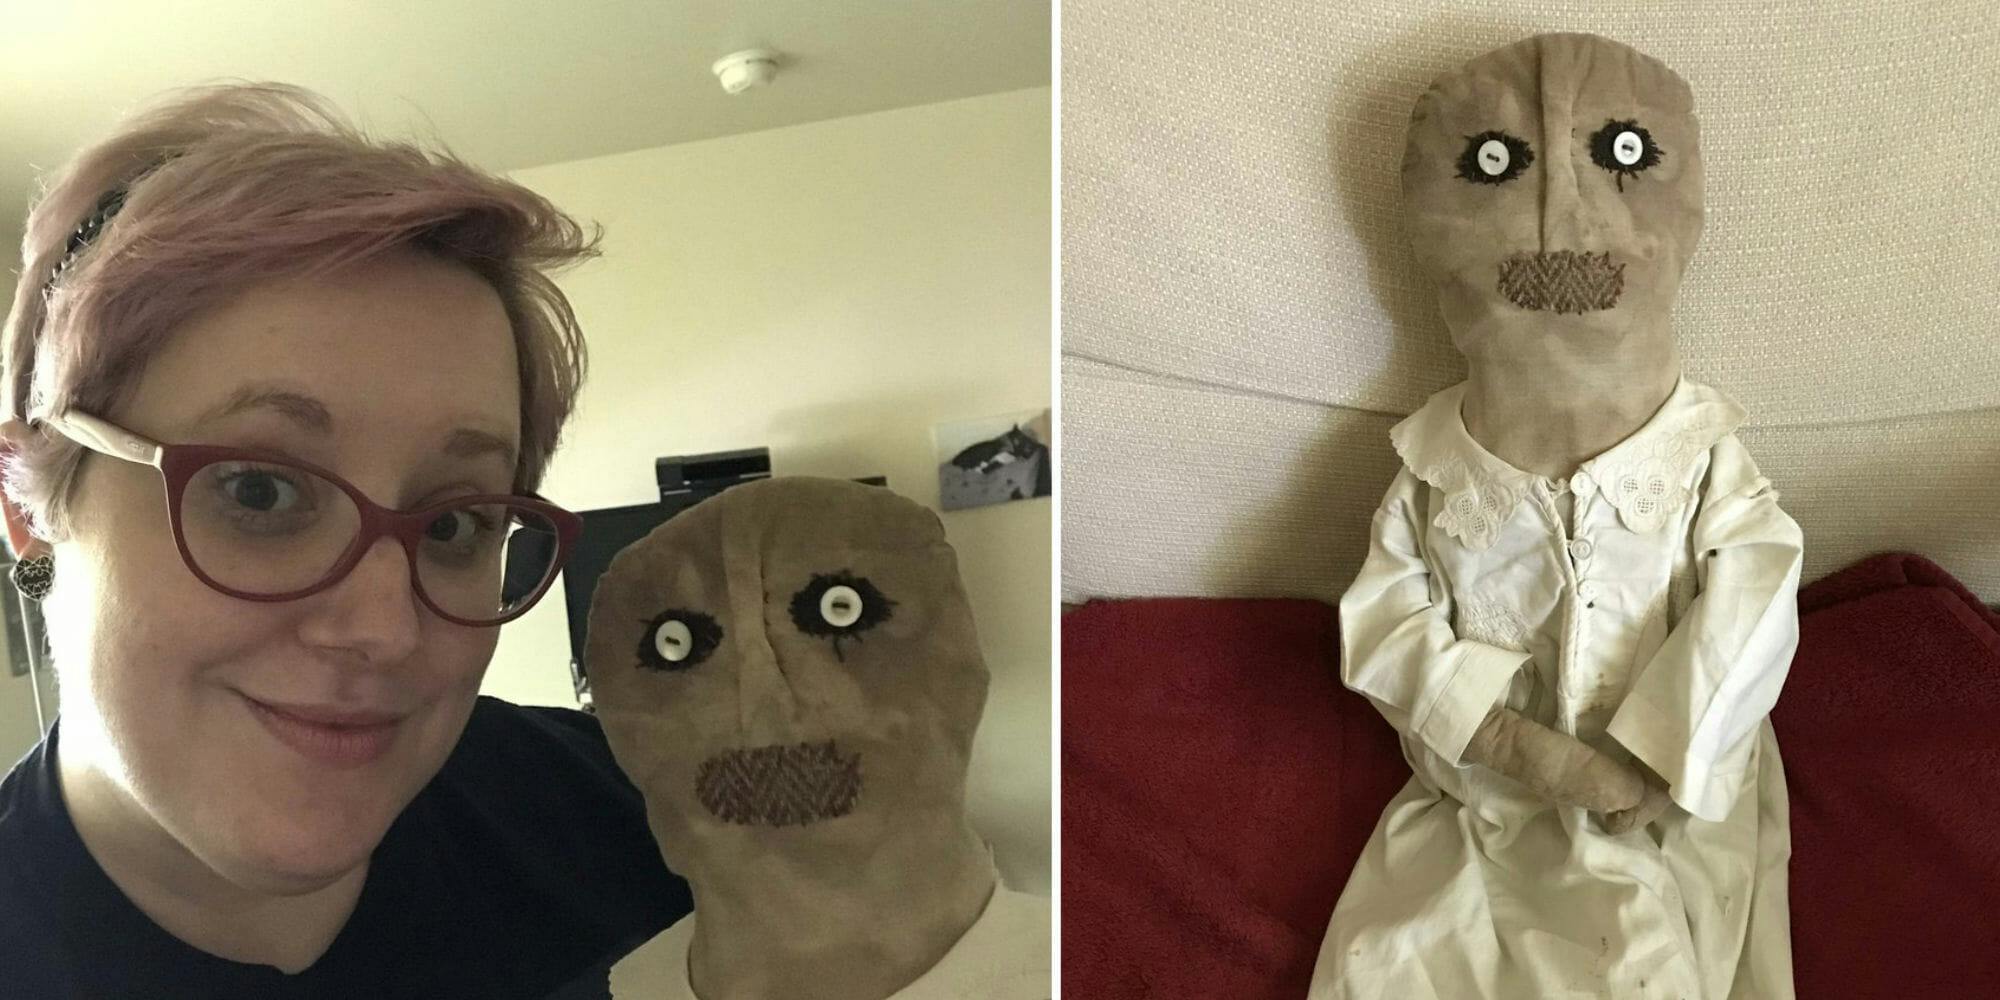 Abby The Haunted Doll